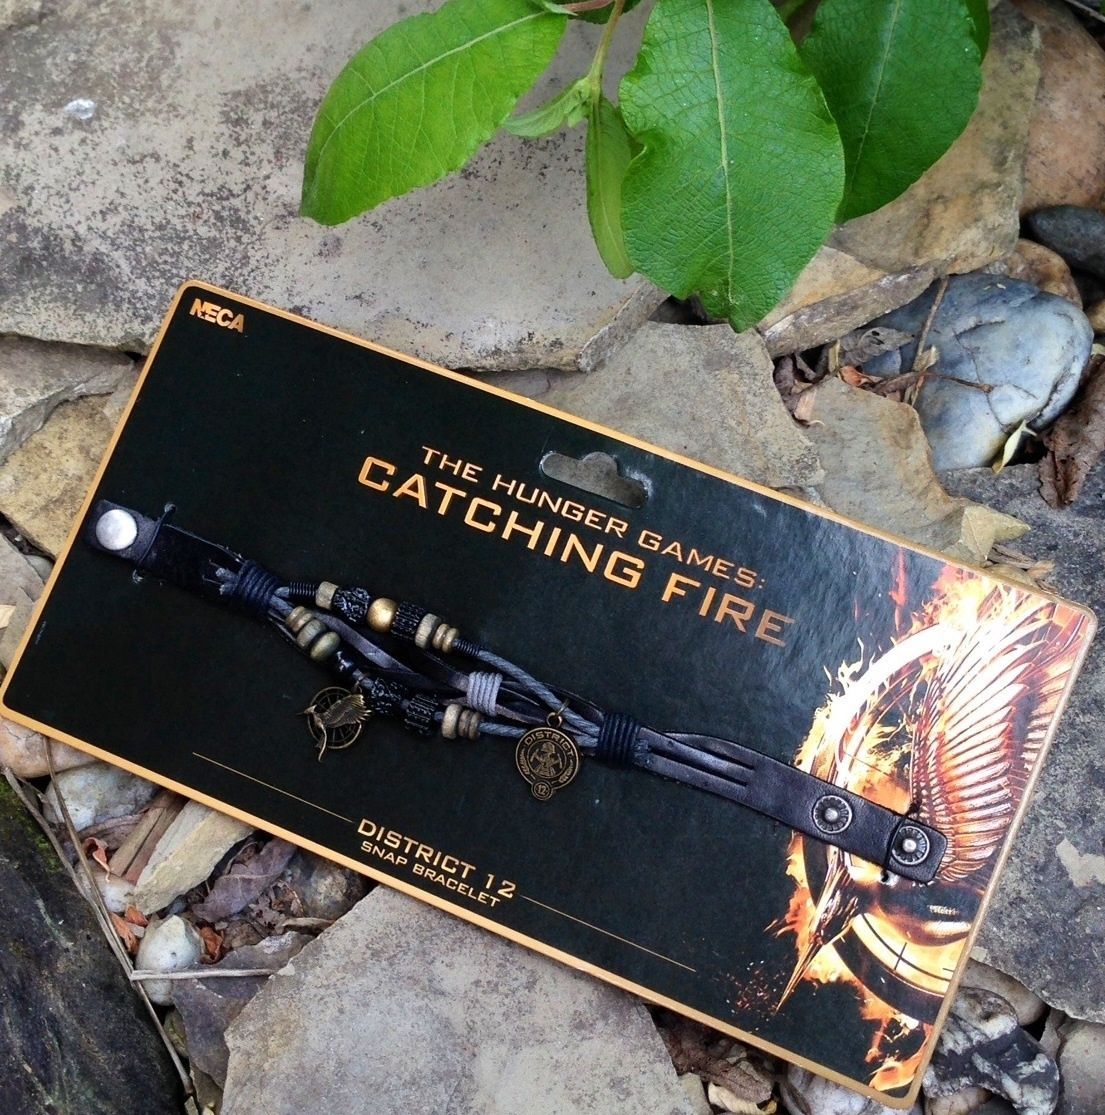 Primary image for The Hunger Games Catching Fire District 12 Snap Bracelet with Charms by NECA